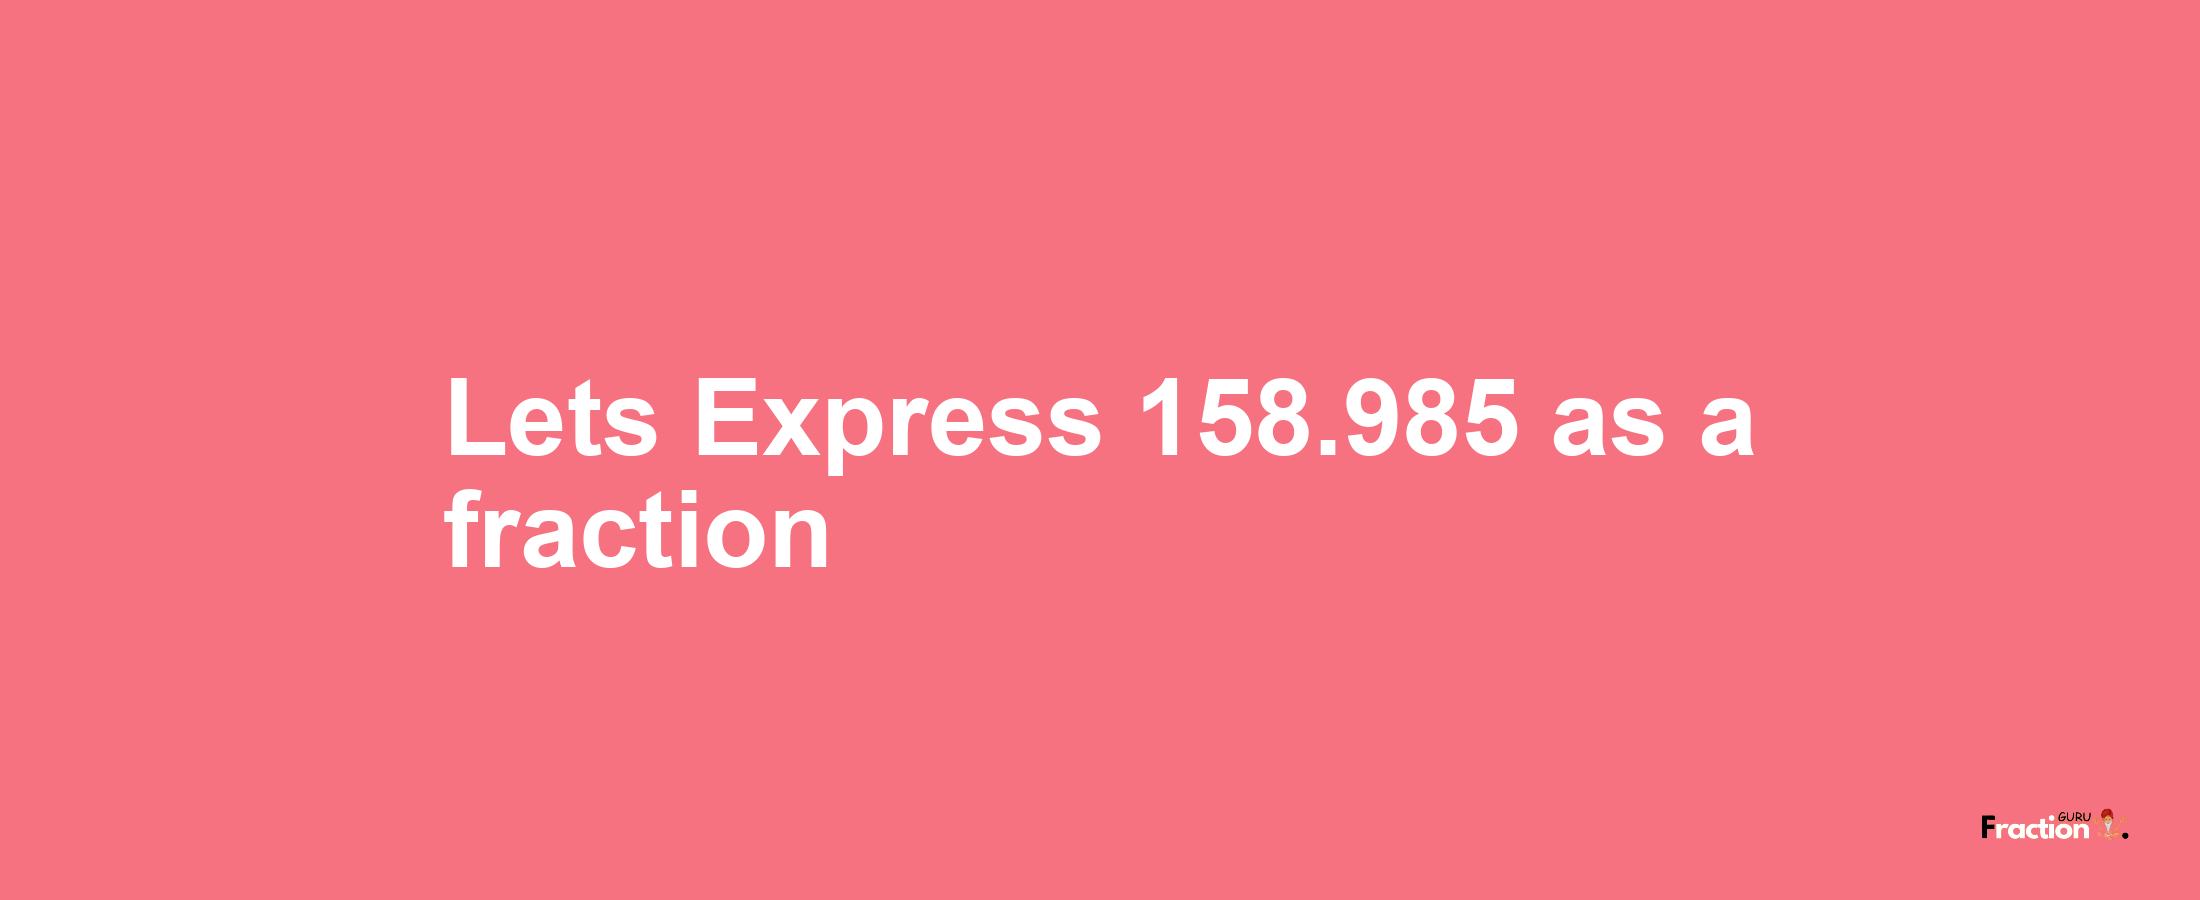 Lets Express 158.985 as afraction